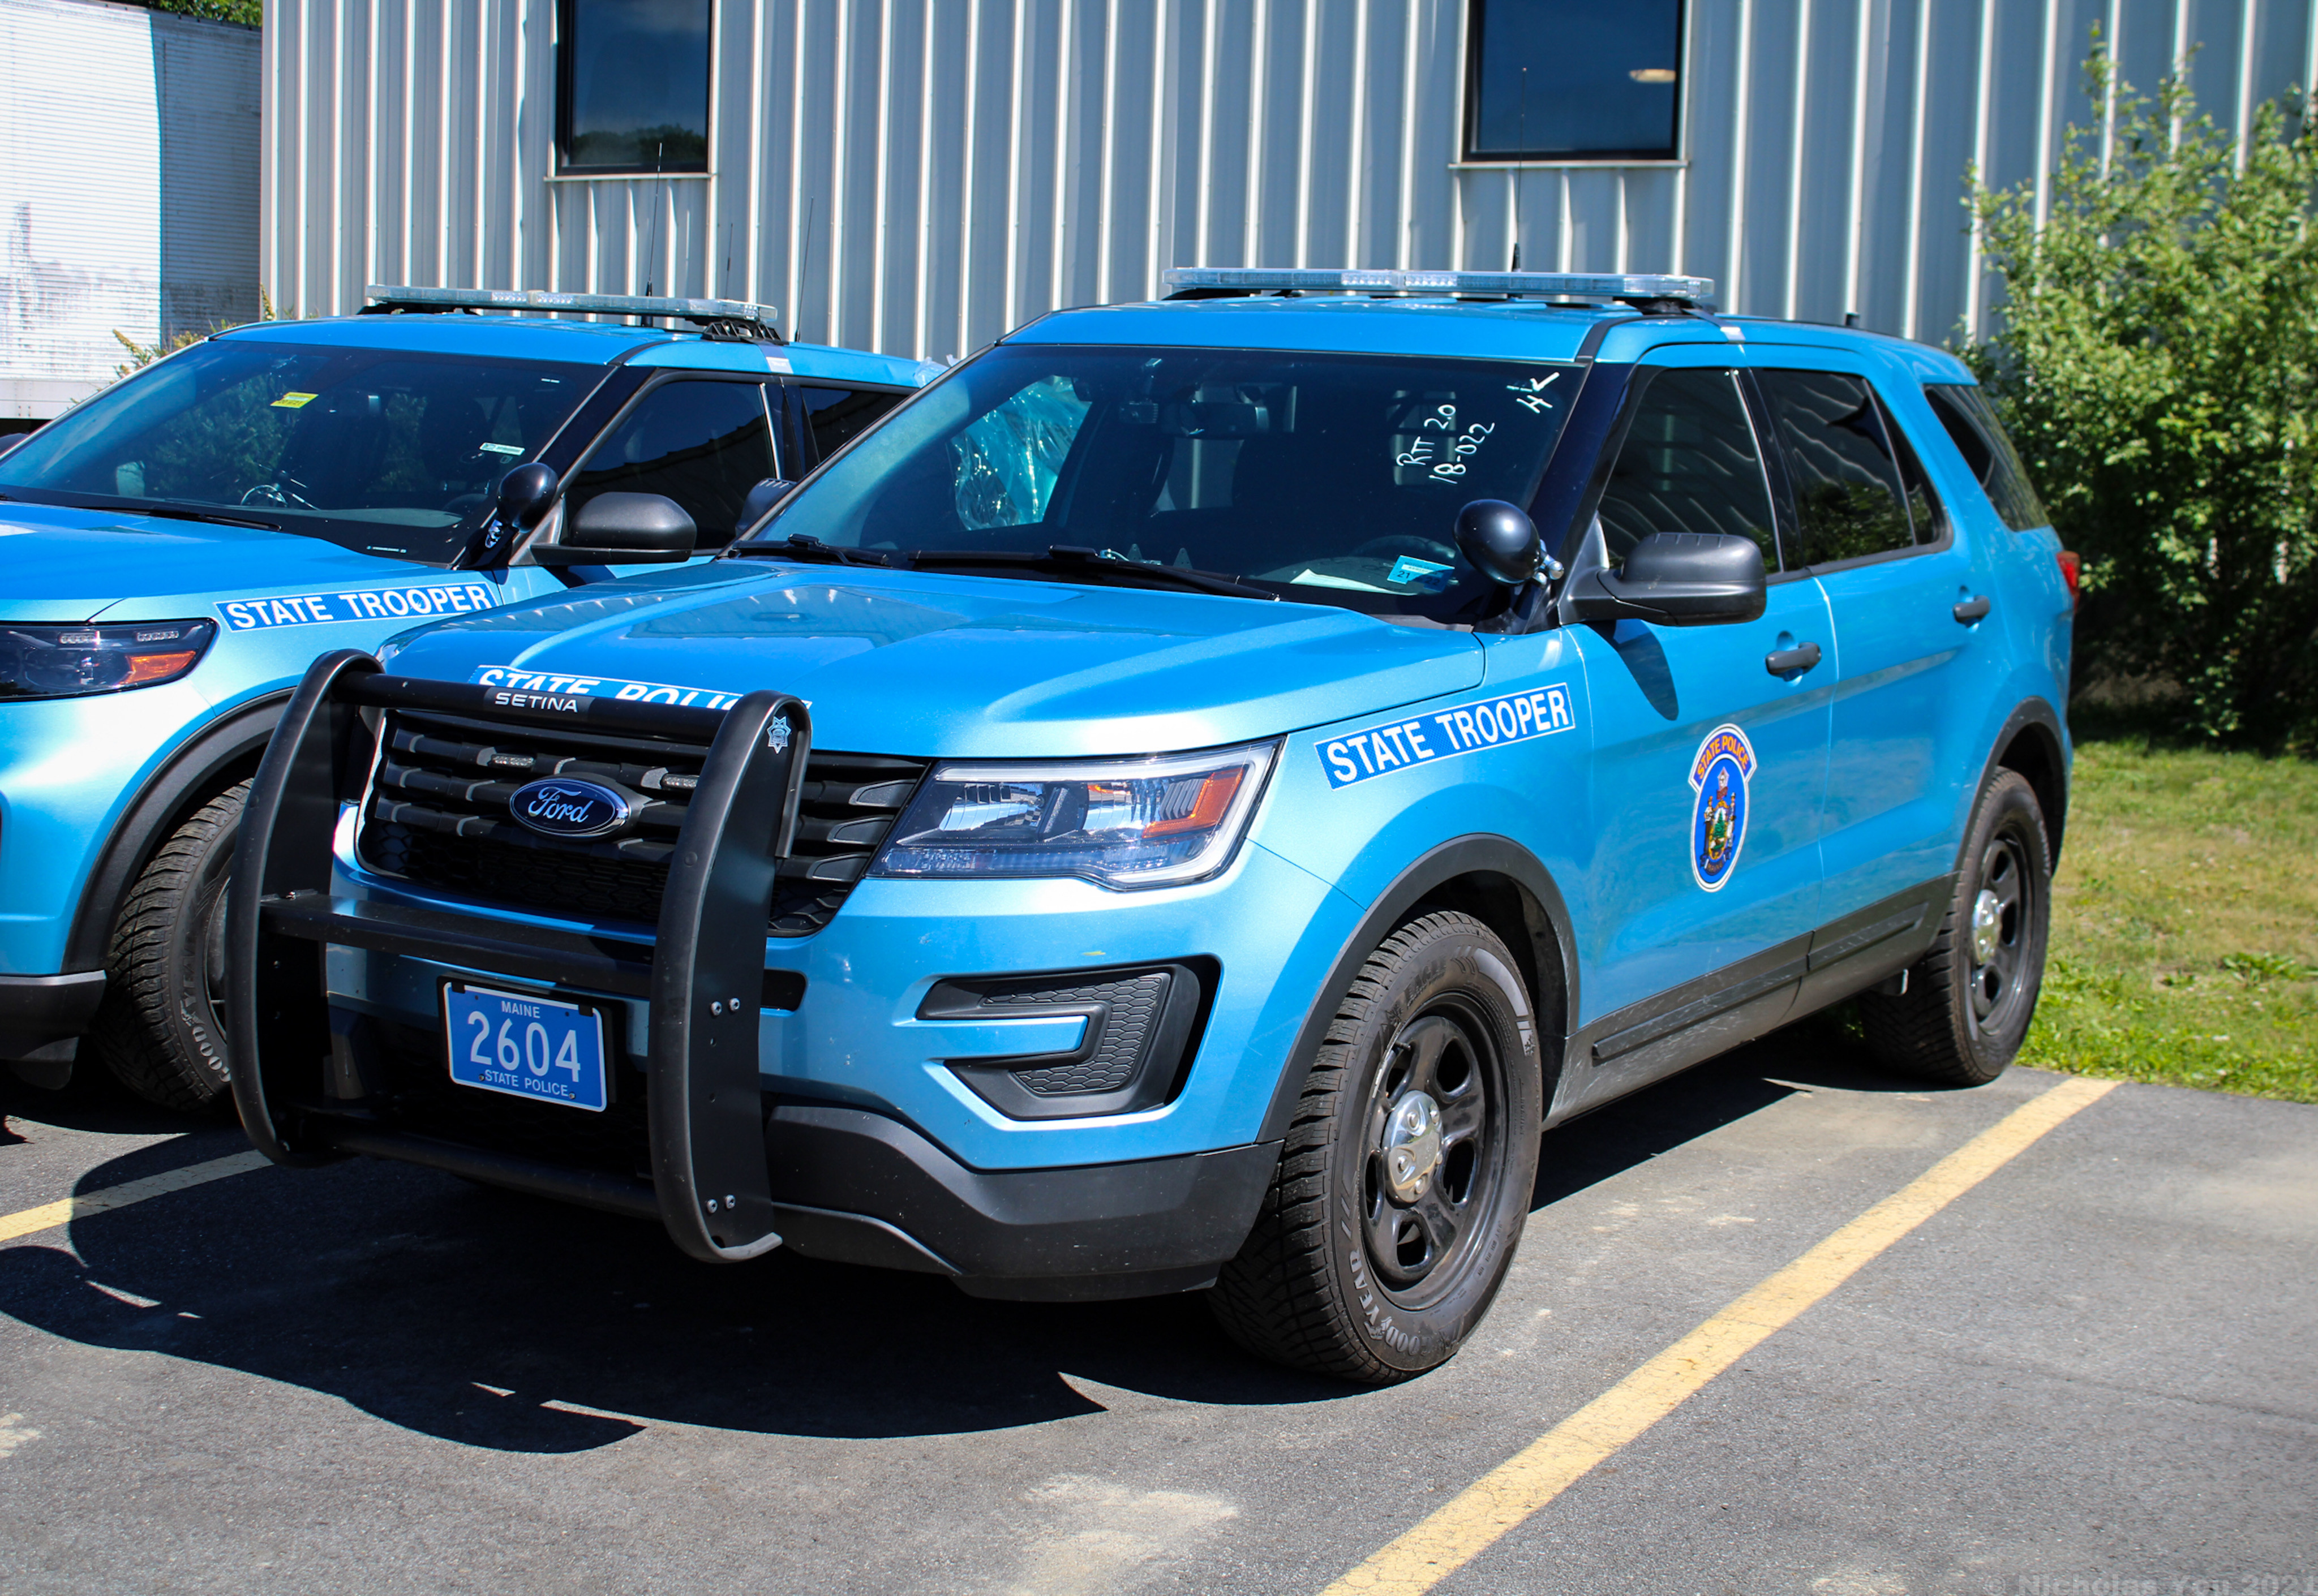 A photo  of Maine State Police
            Cruiser 2604, a 2016-2019 Ford Police Interceptor Utility             taken by Nicholas You